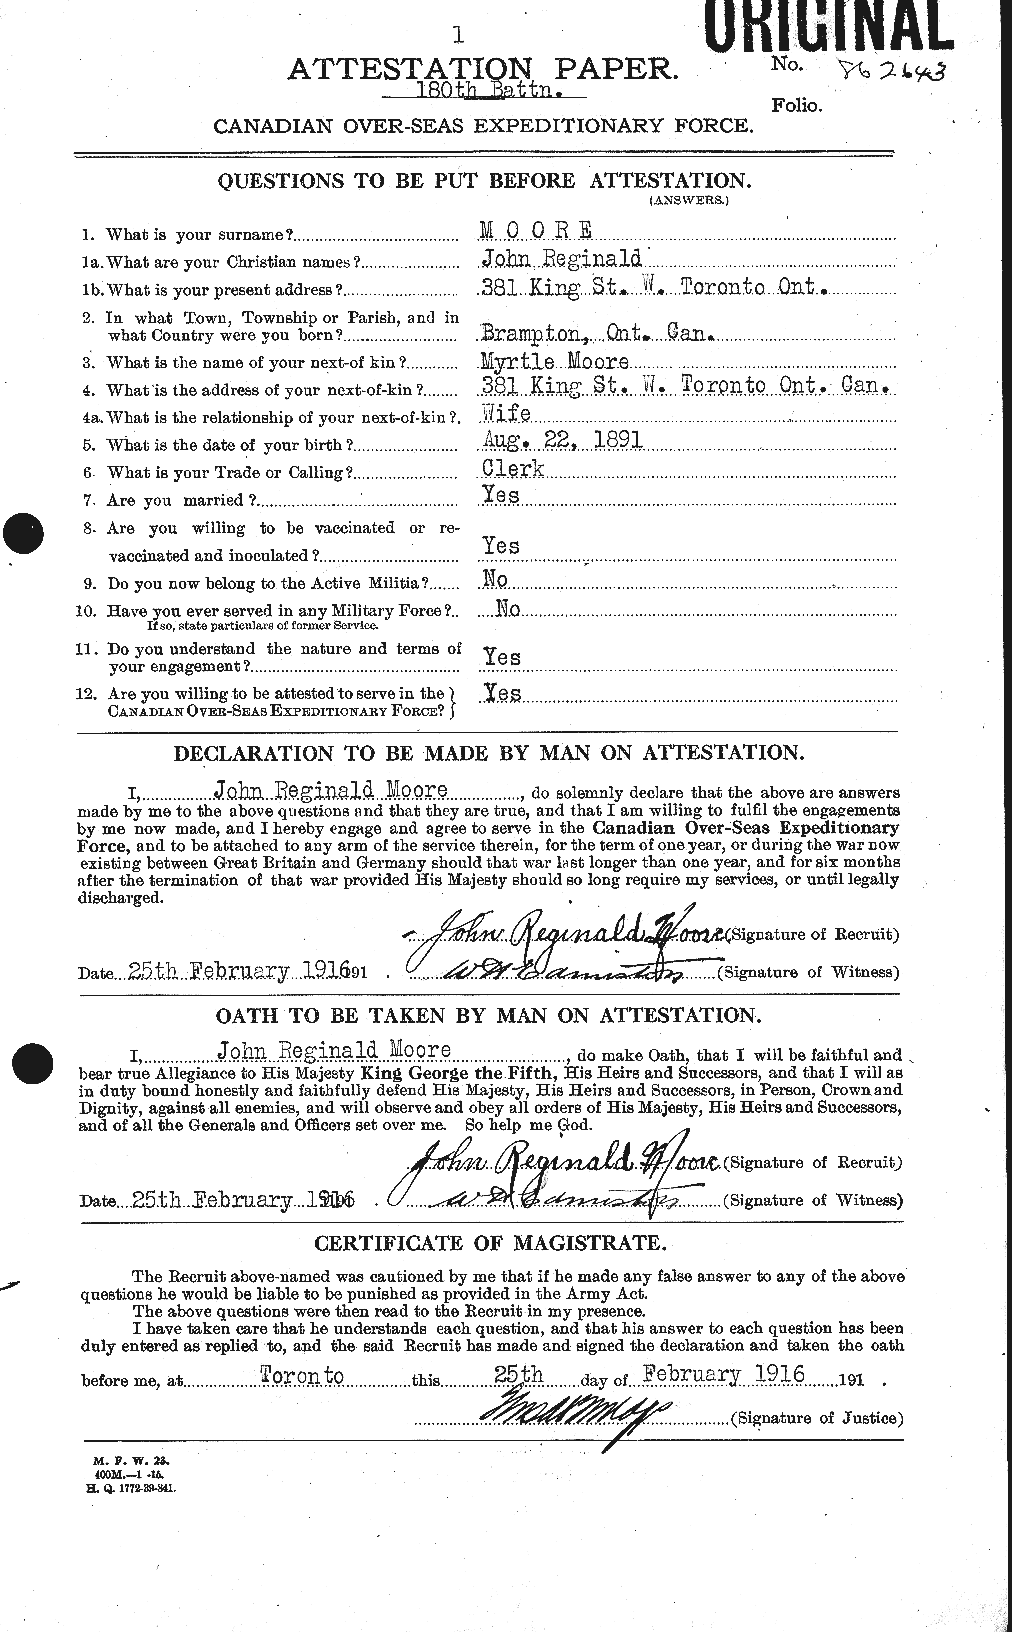 Personnel Records of the First World War - CEF 503325a